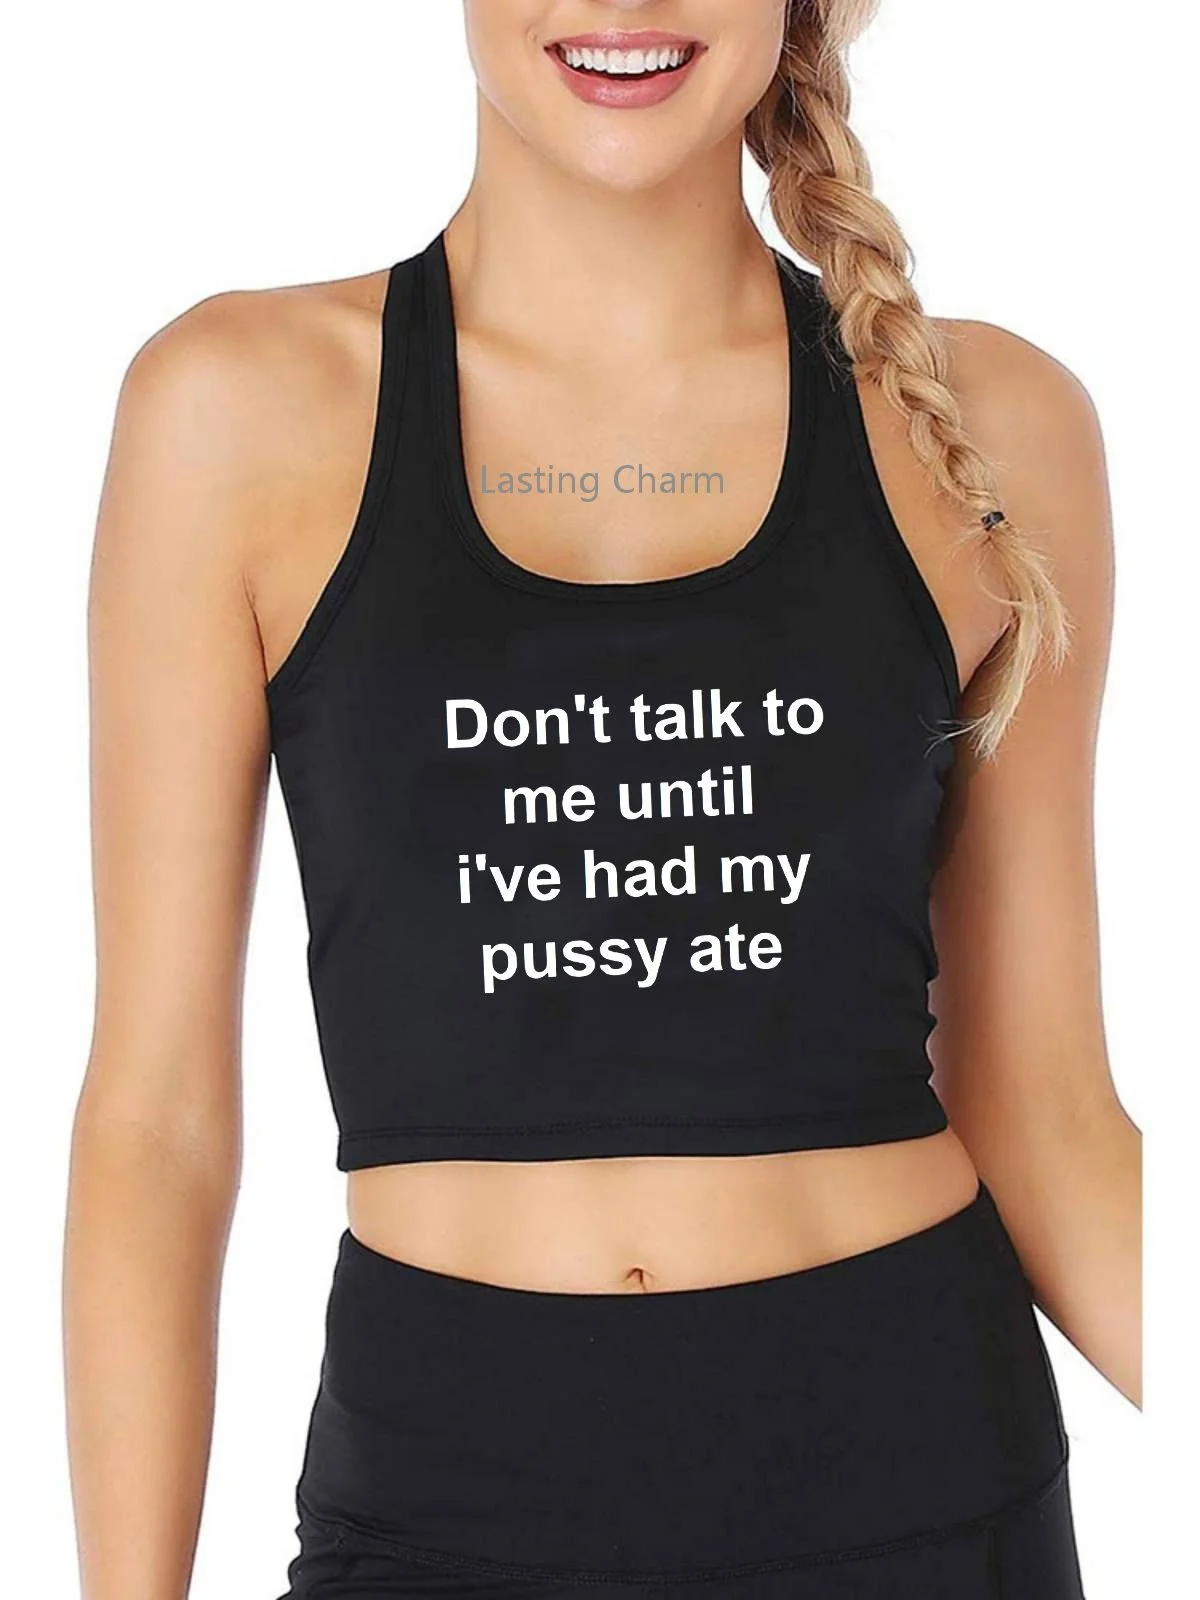 

Don't Talk To Me Until I've Had My Pussy Ate Print Sexy Crop Top Hotwife Humorous Flirtation Tank Tops Swinger Naughty Camisole